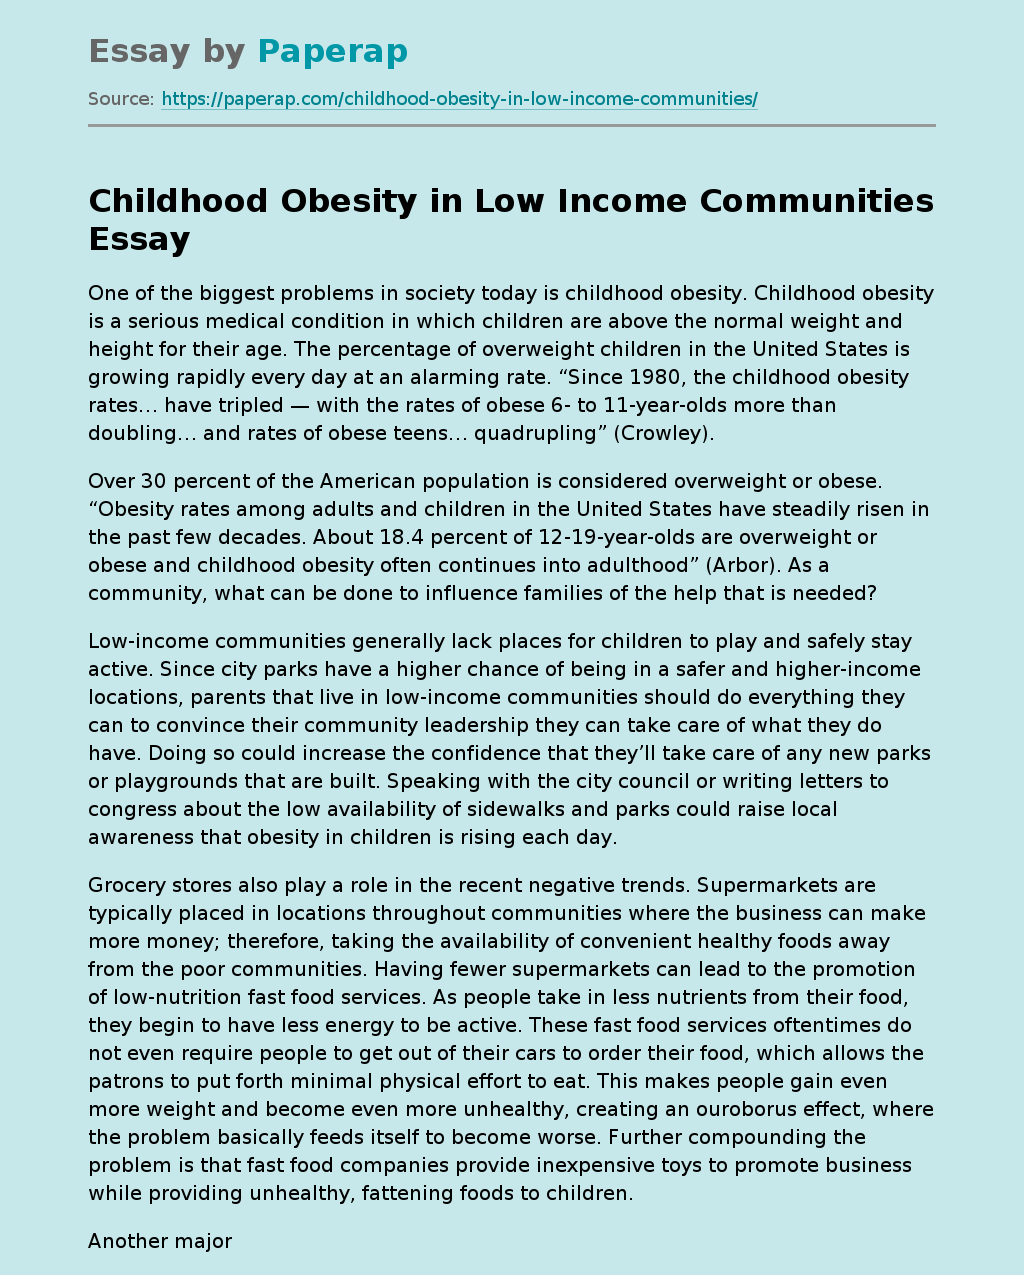 Childhood Obesity in Low Income Communities